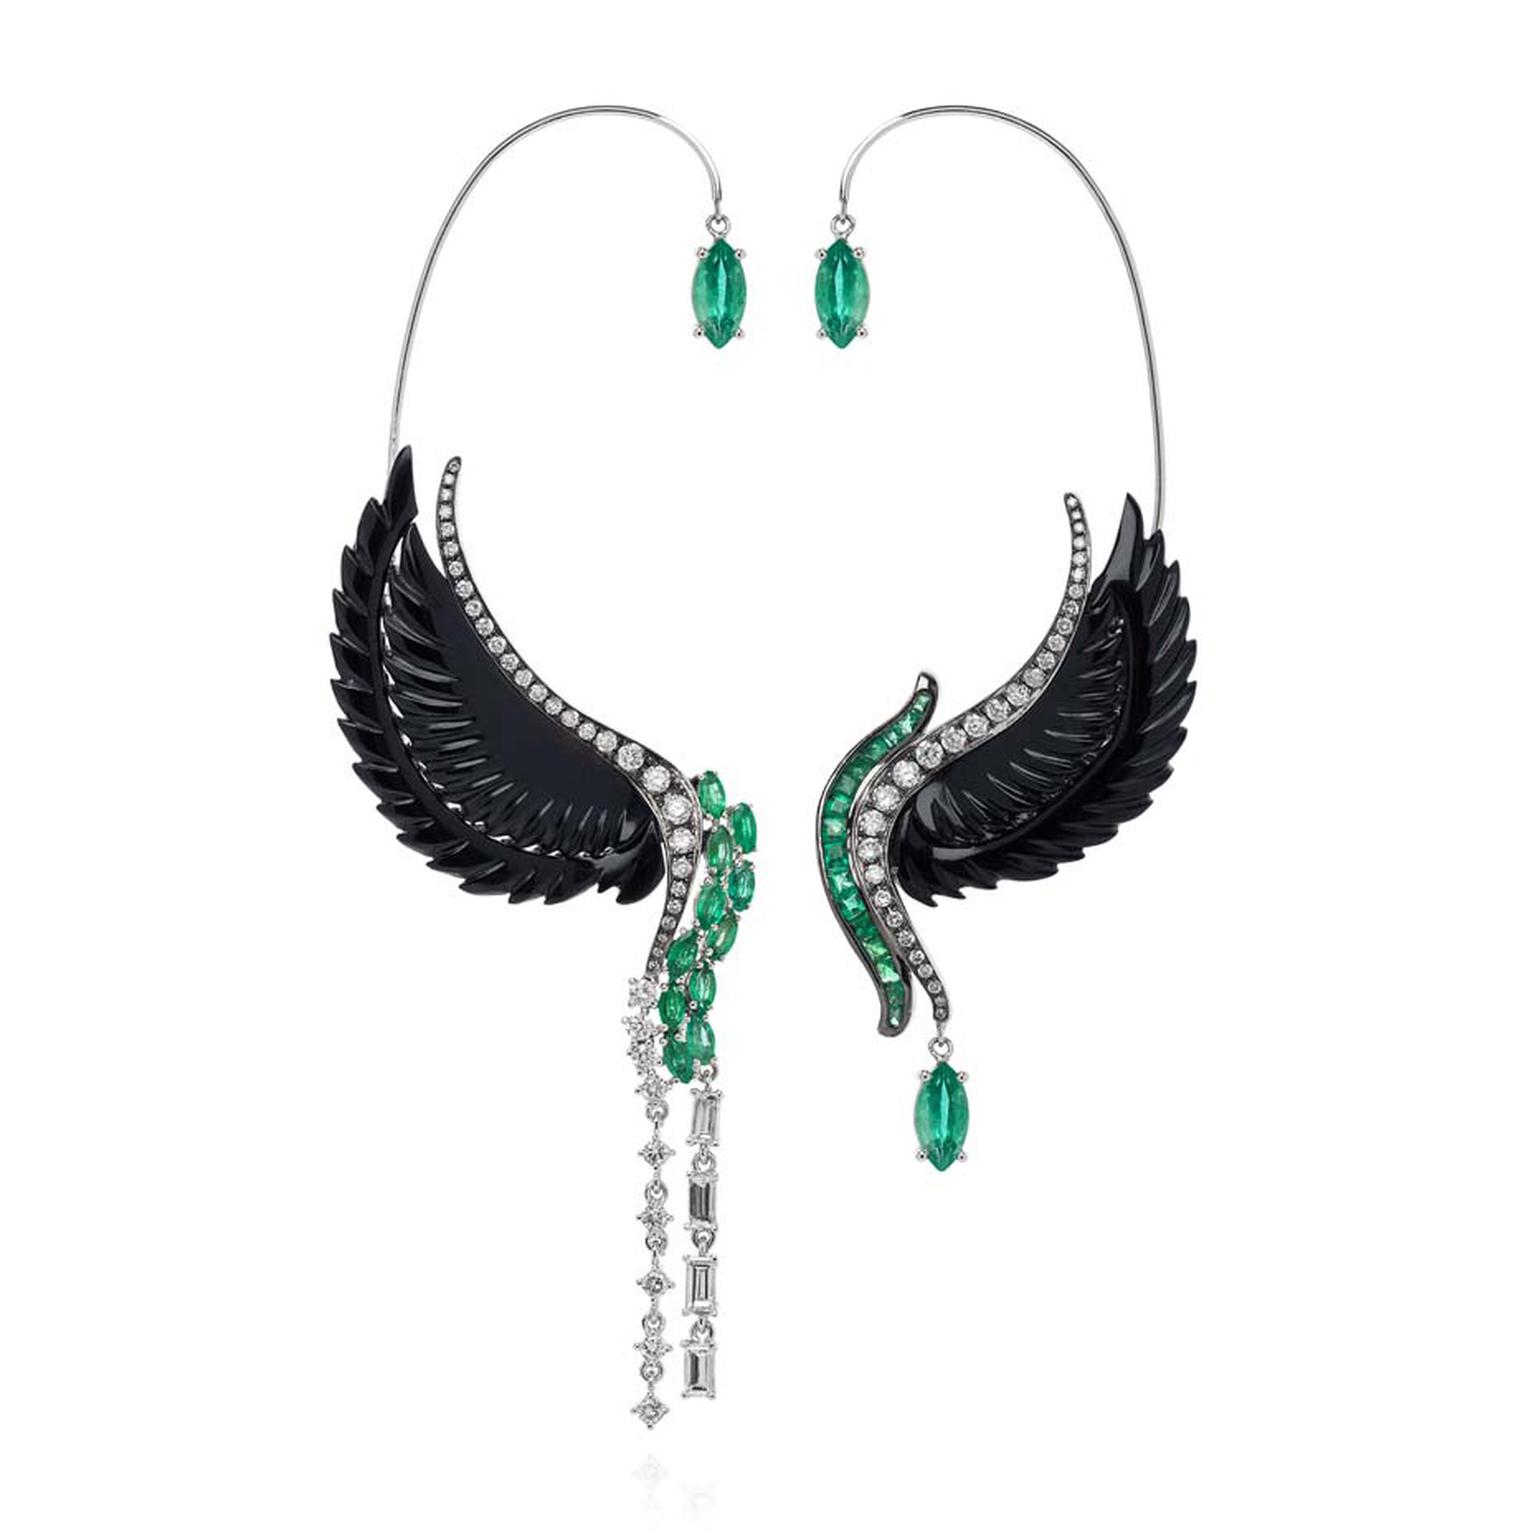 Leyla Abdollahi Lust & Lure collection ear cuffs in white gold with diamonds, emeralds and onyx.